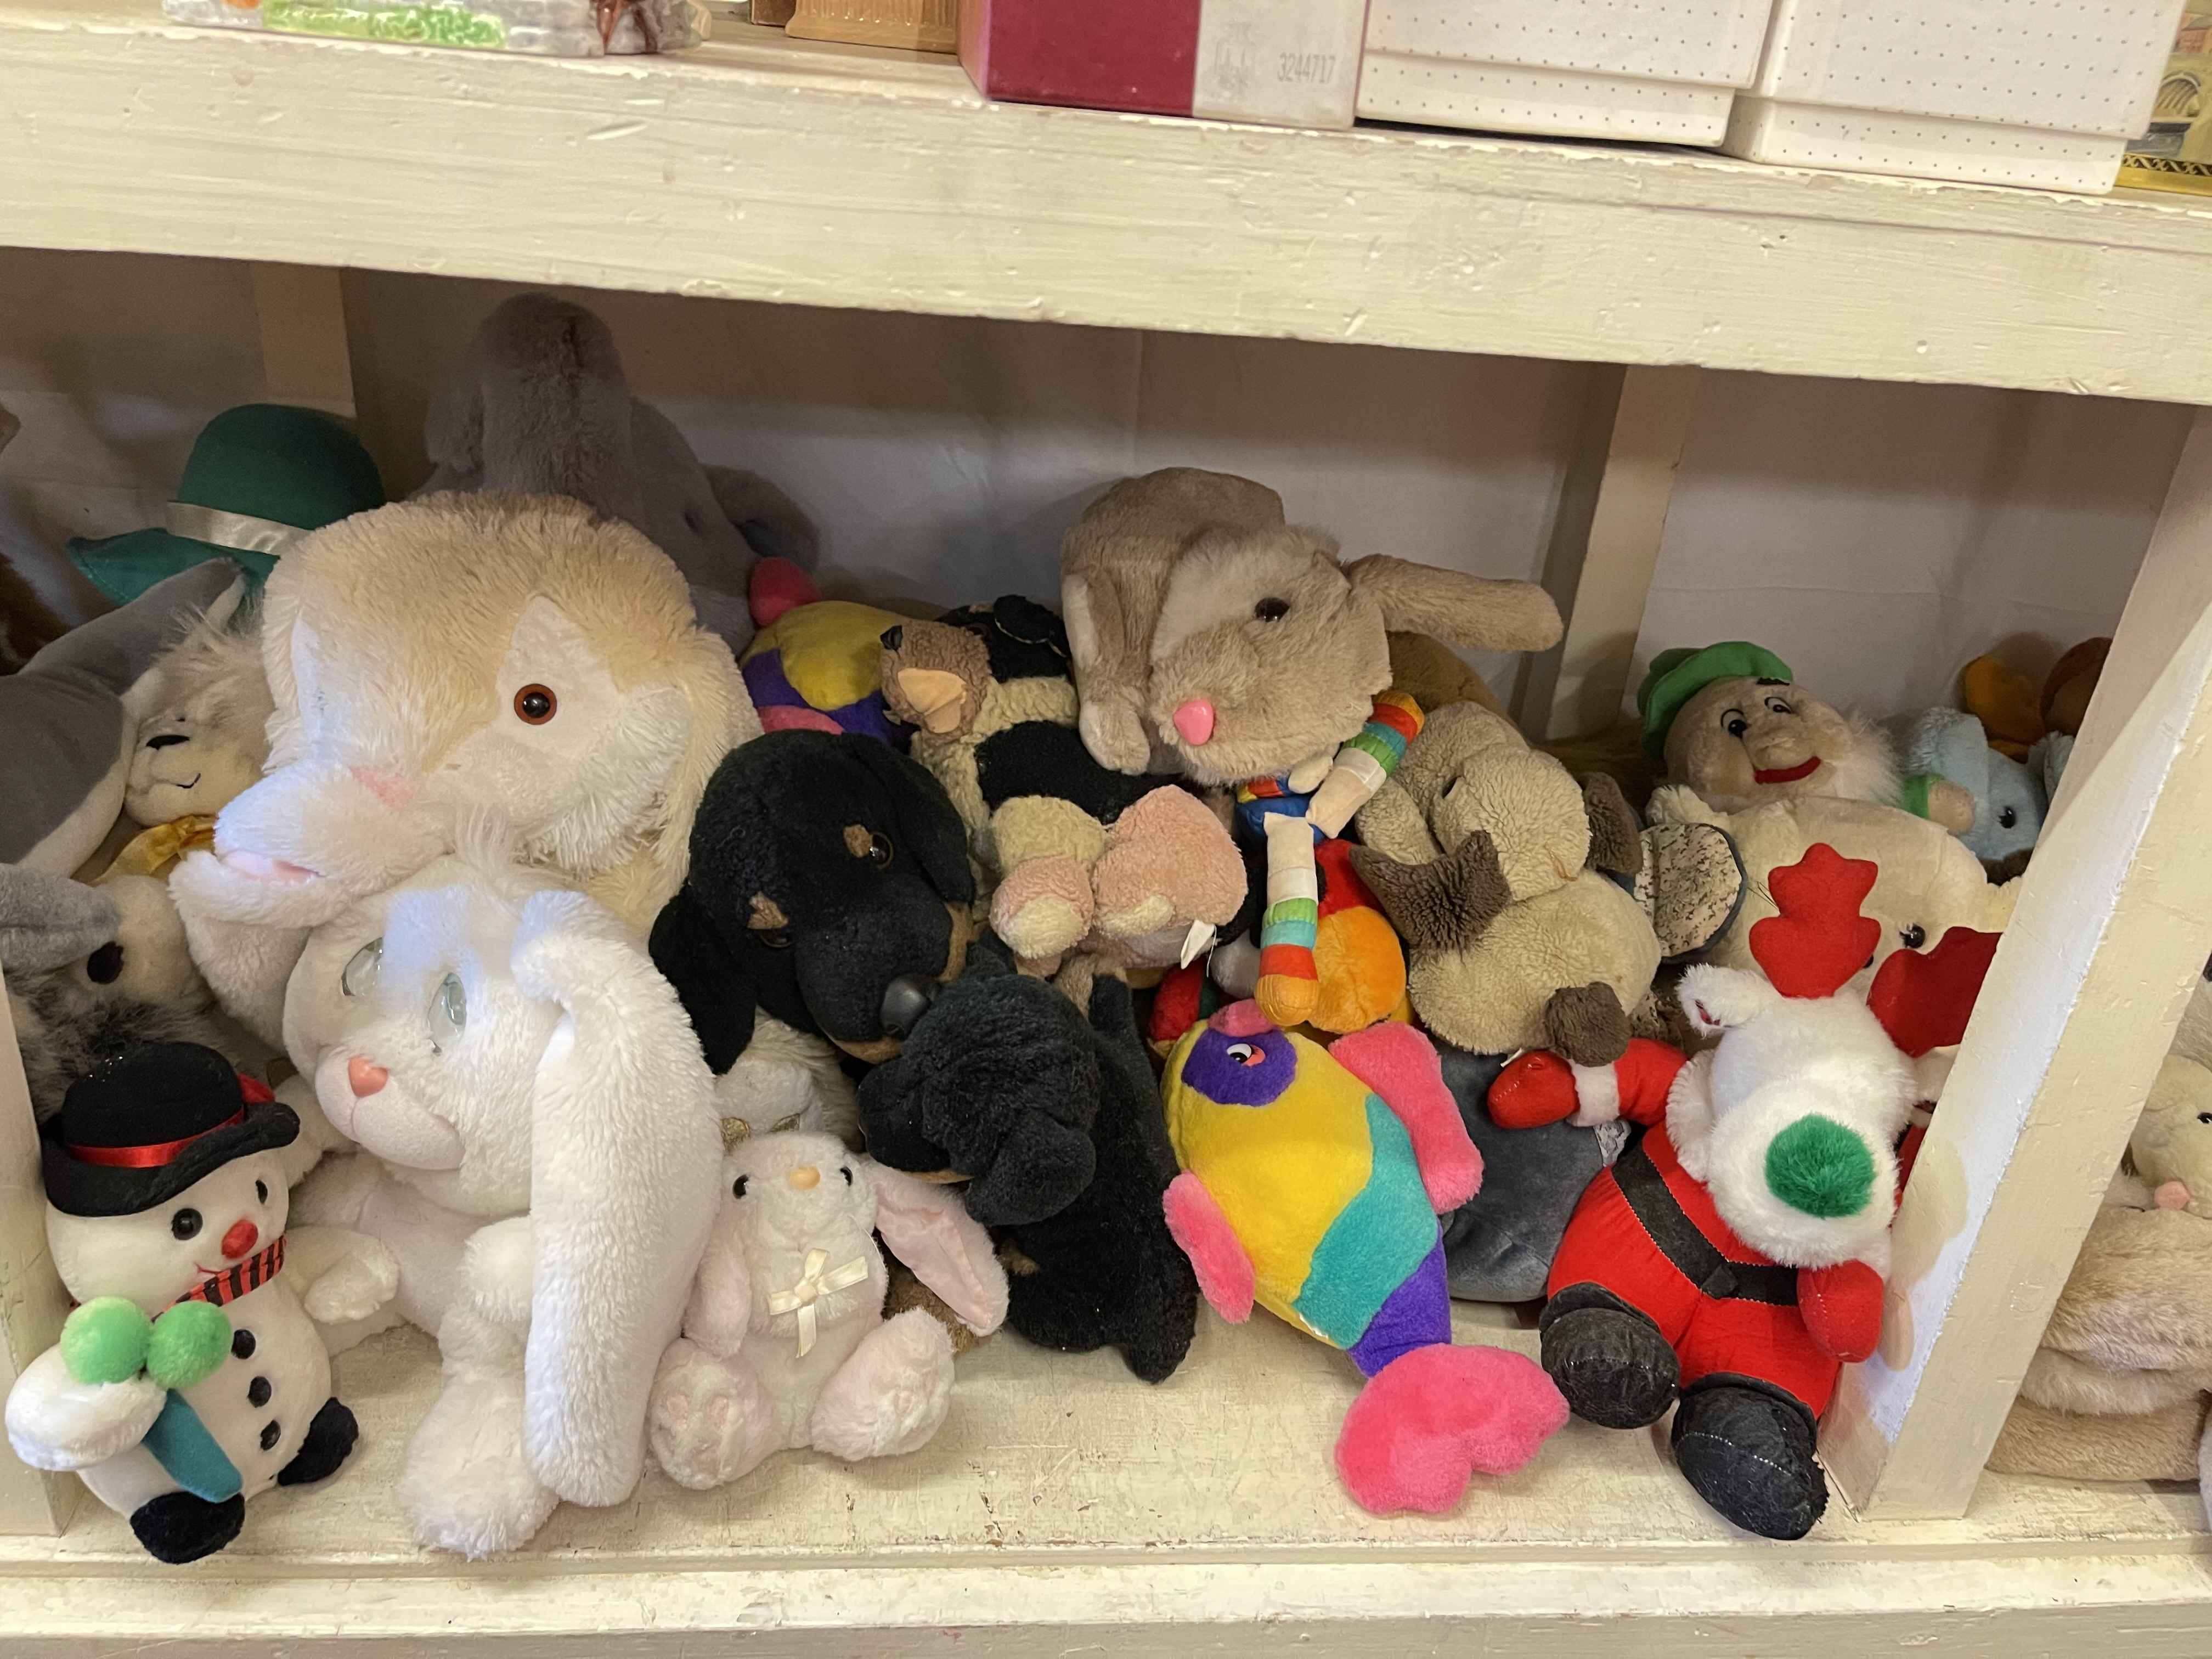 Large collection of soft toys including various novelty teddy bears, etc. - Image 3 of 4